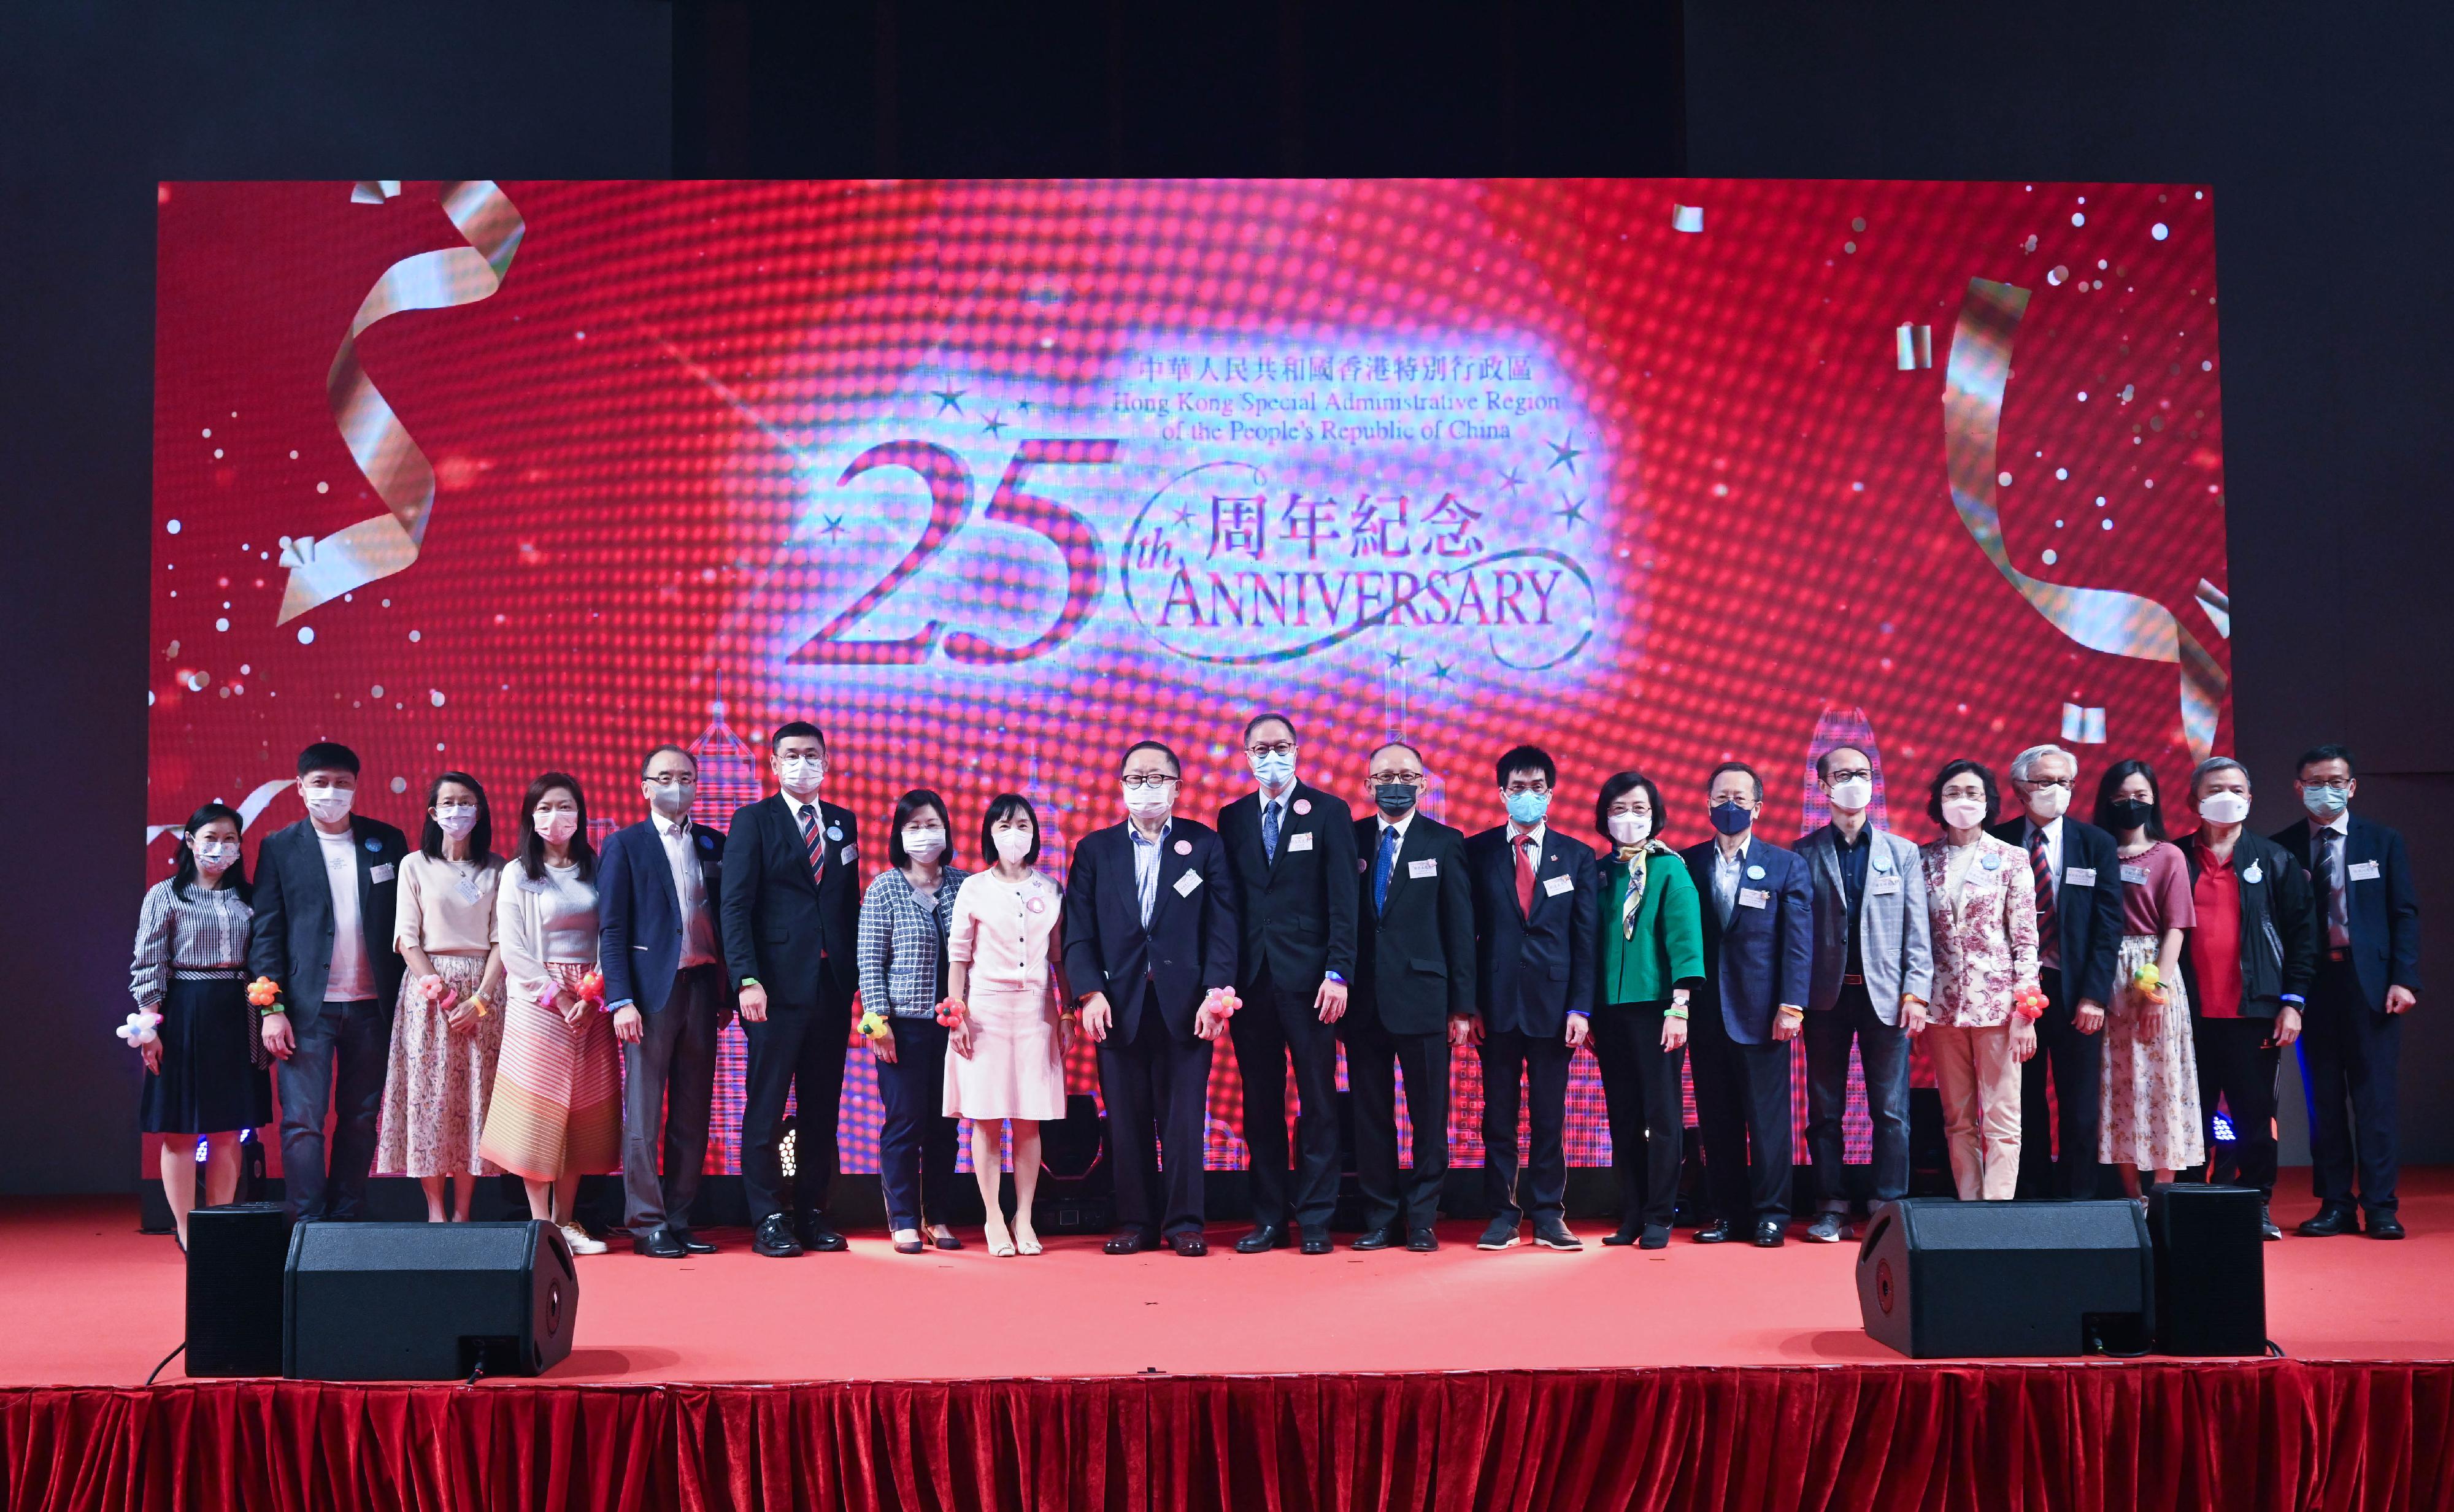 The Social Welfare Department today (November 9) held the 2022 Award Presentation Ceremony of the Opportunities for the Elderly Project (OEP). Photo shows the Director of Social Welfare, Miss Charmaine Lee (eighth left); the Chairman of the OEP Advisory Committee, Professor Diana Lee (seventh left) and the Chairman of the Elderly Commission, Dr Donald Li (ninth left), joined other guests in celebrating the 25th anniversary of the establishment of the Hong Kong Special Administrative Region at the ceremony.